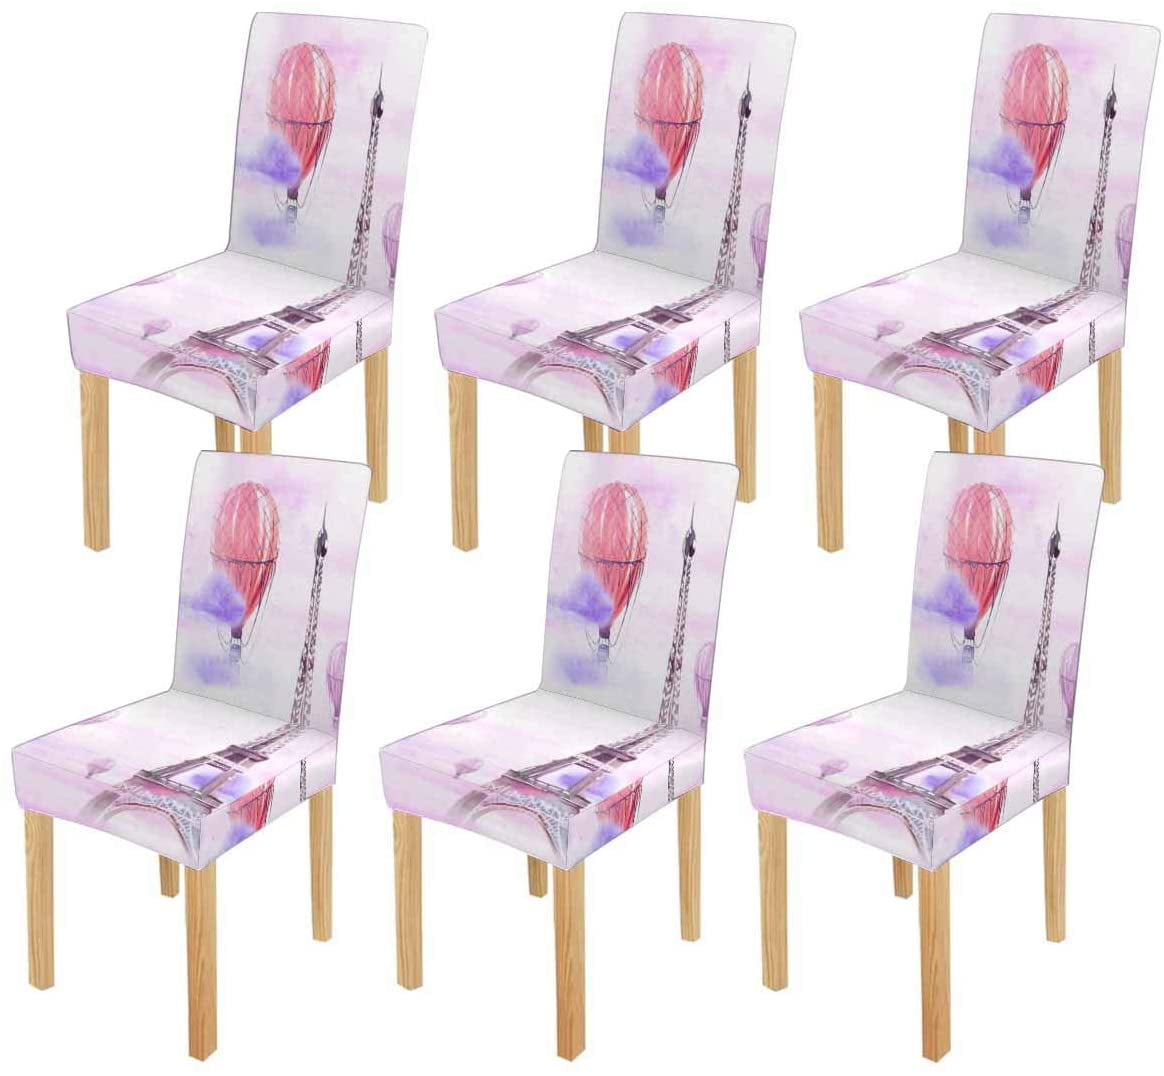 Stretch Dining Chair Covers Slipcovers Universal Fit Chair Protective Covers Hot 